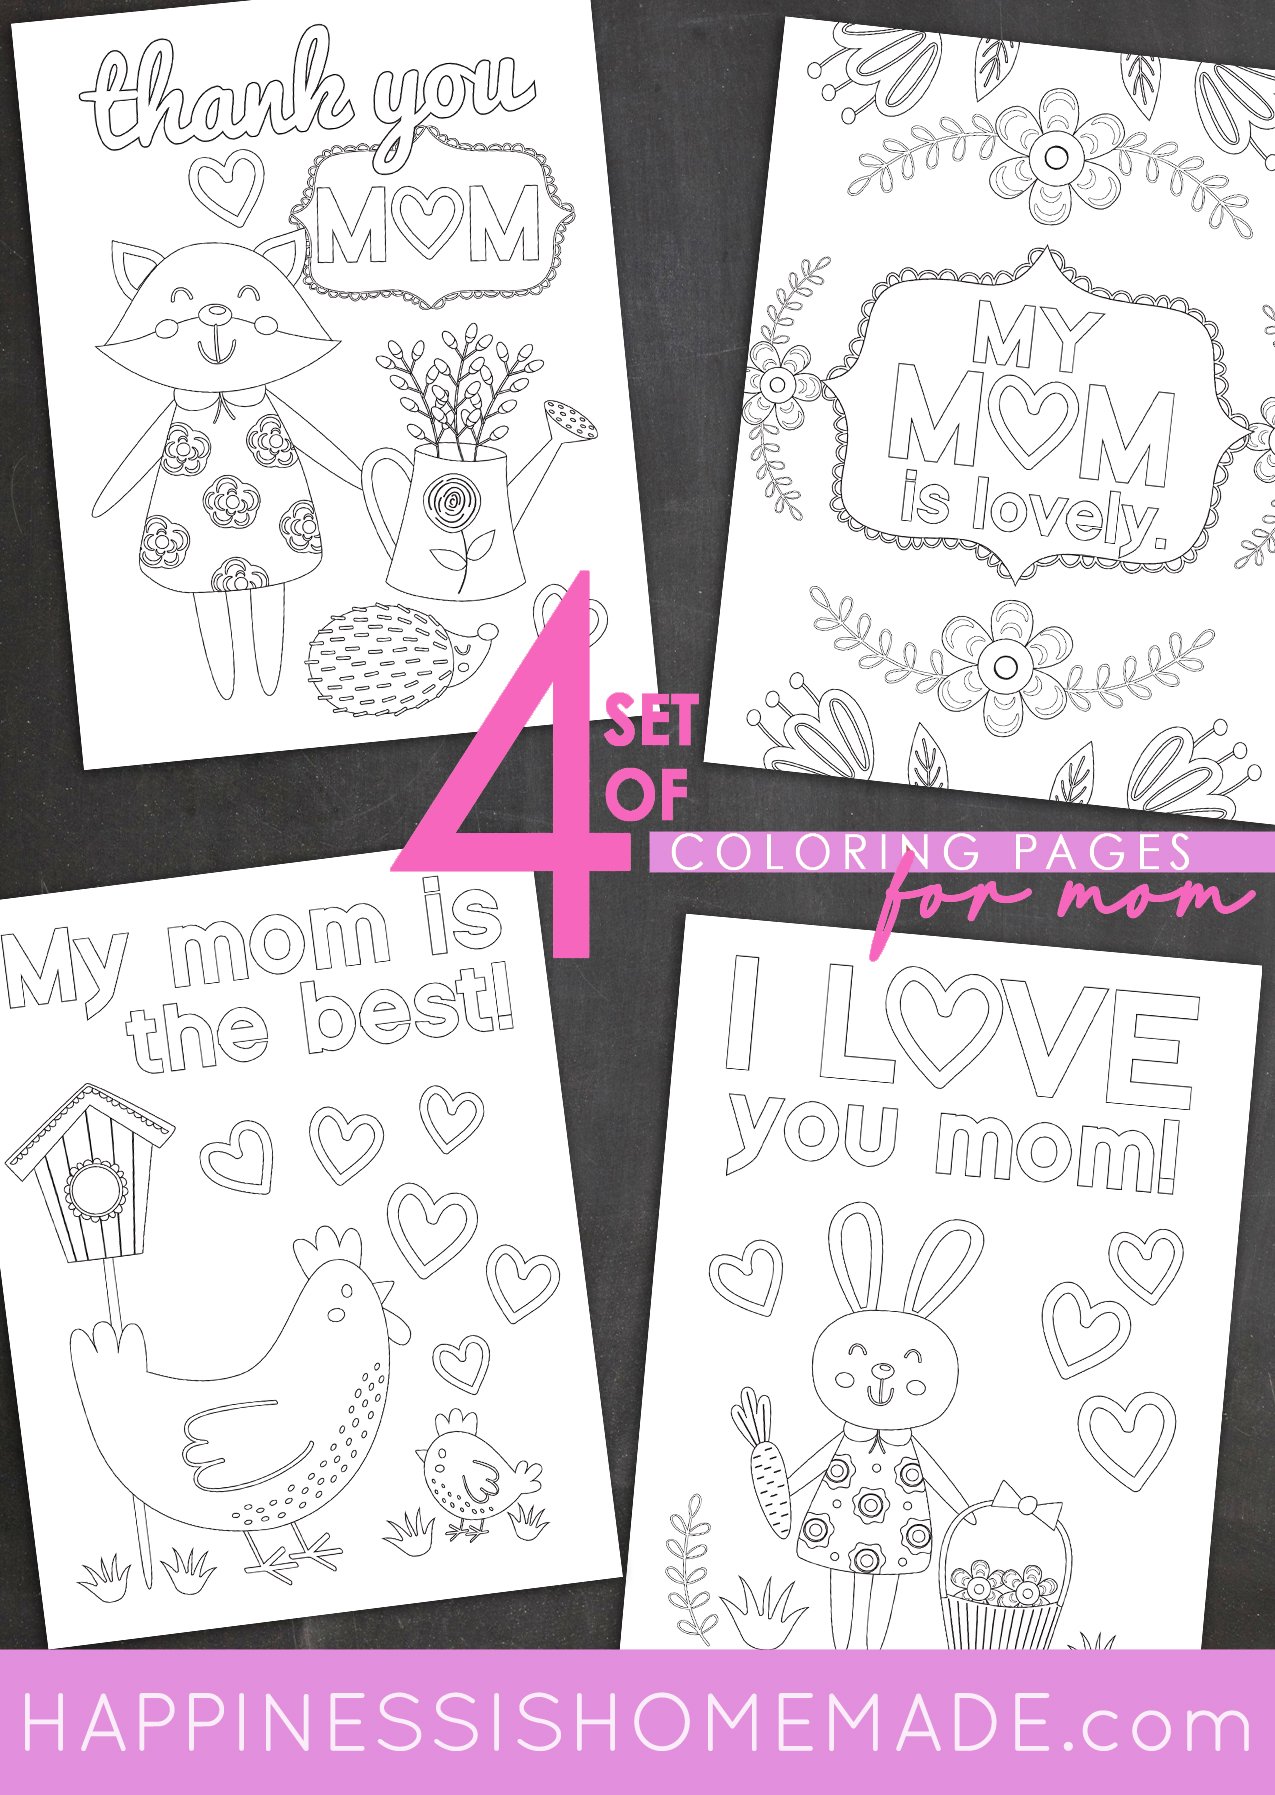 Set of 4 Coloring Pages for Mom pin graphic